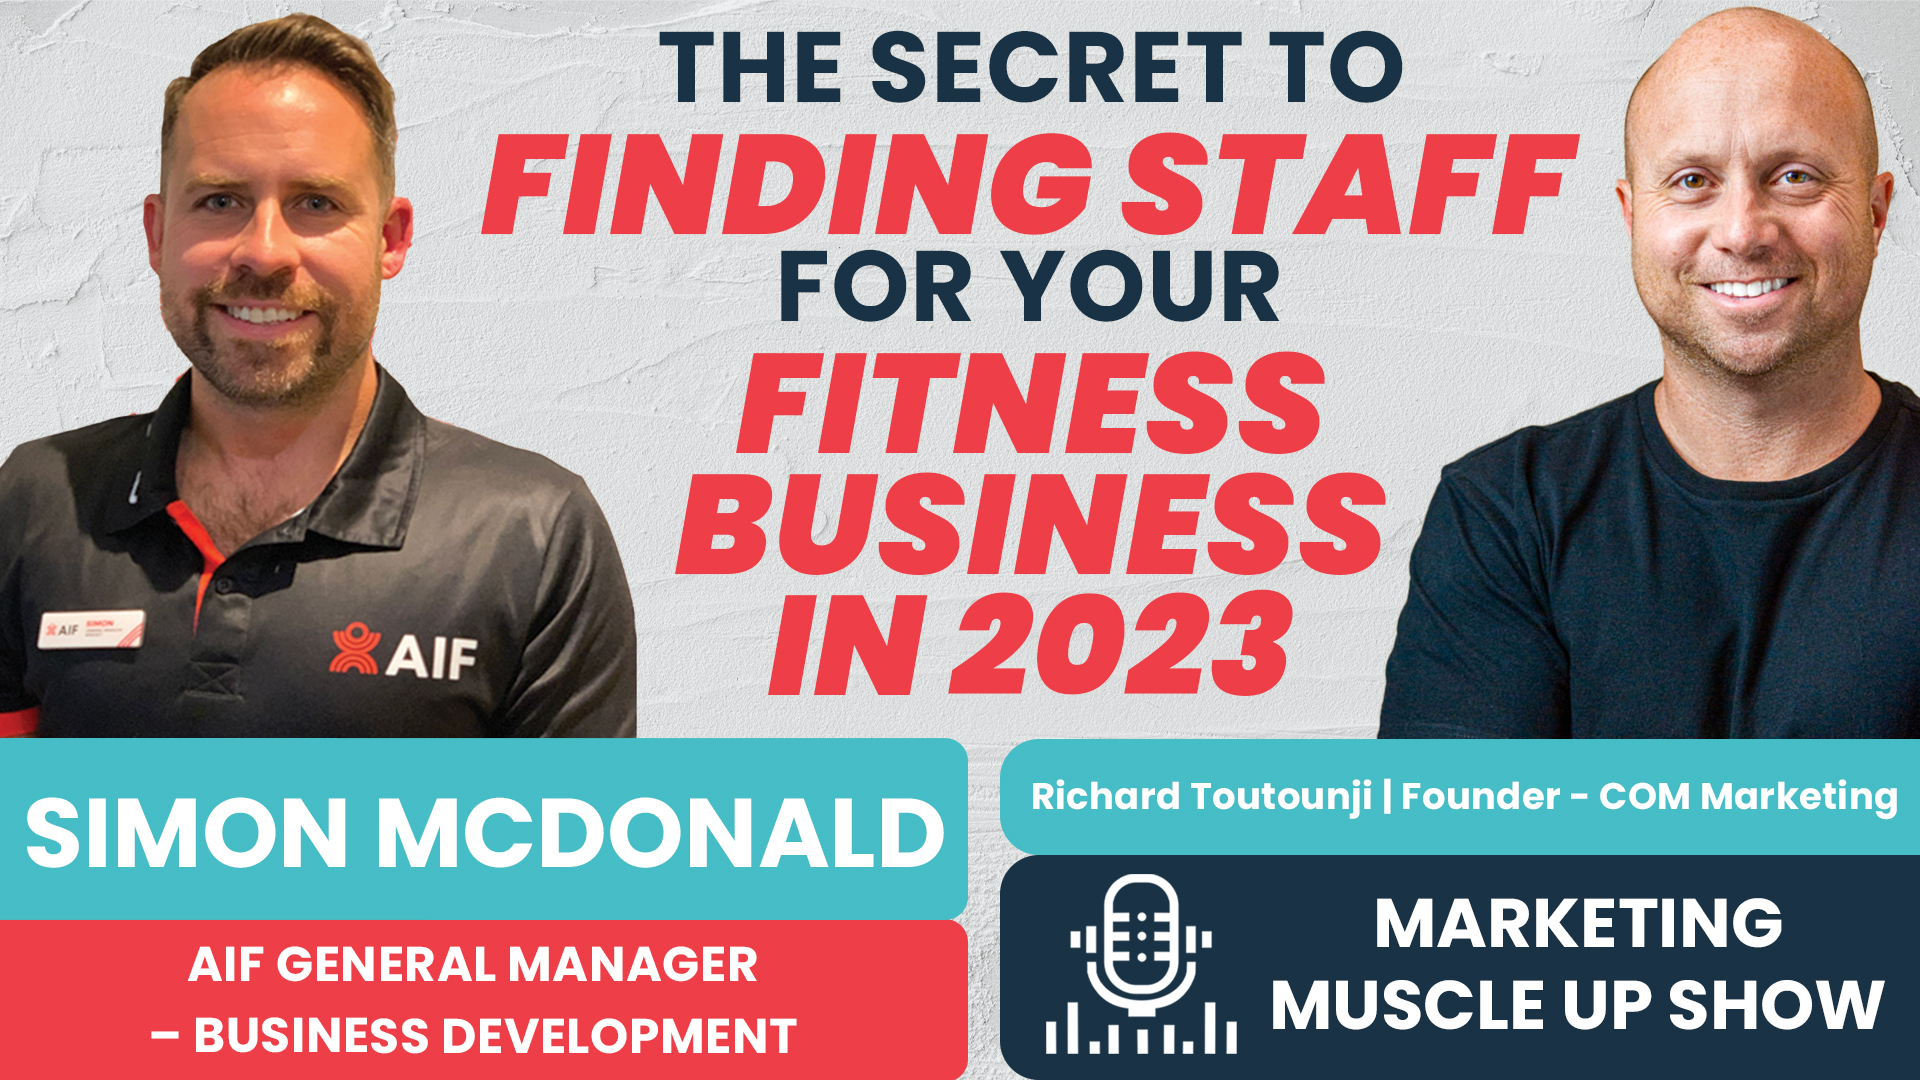 Episode 172: The secret to finding staff for your fitness business in 2023 with Simon Mcdonald